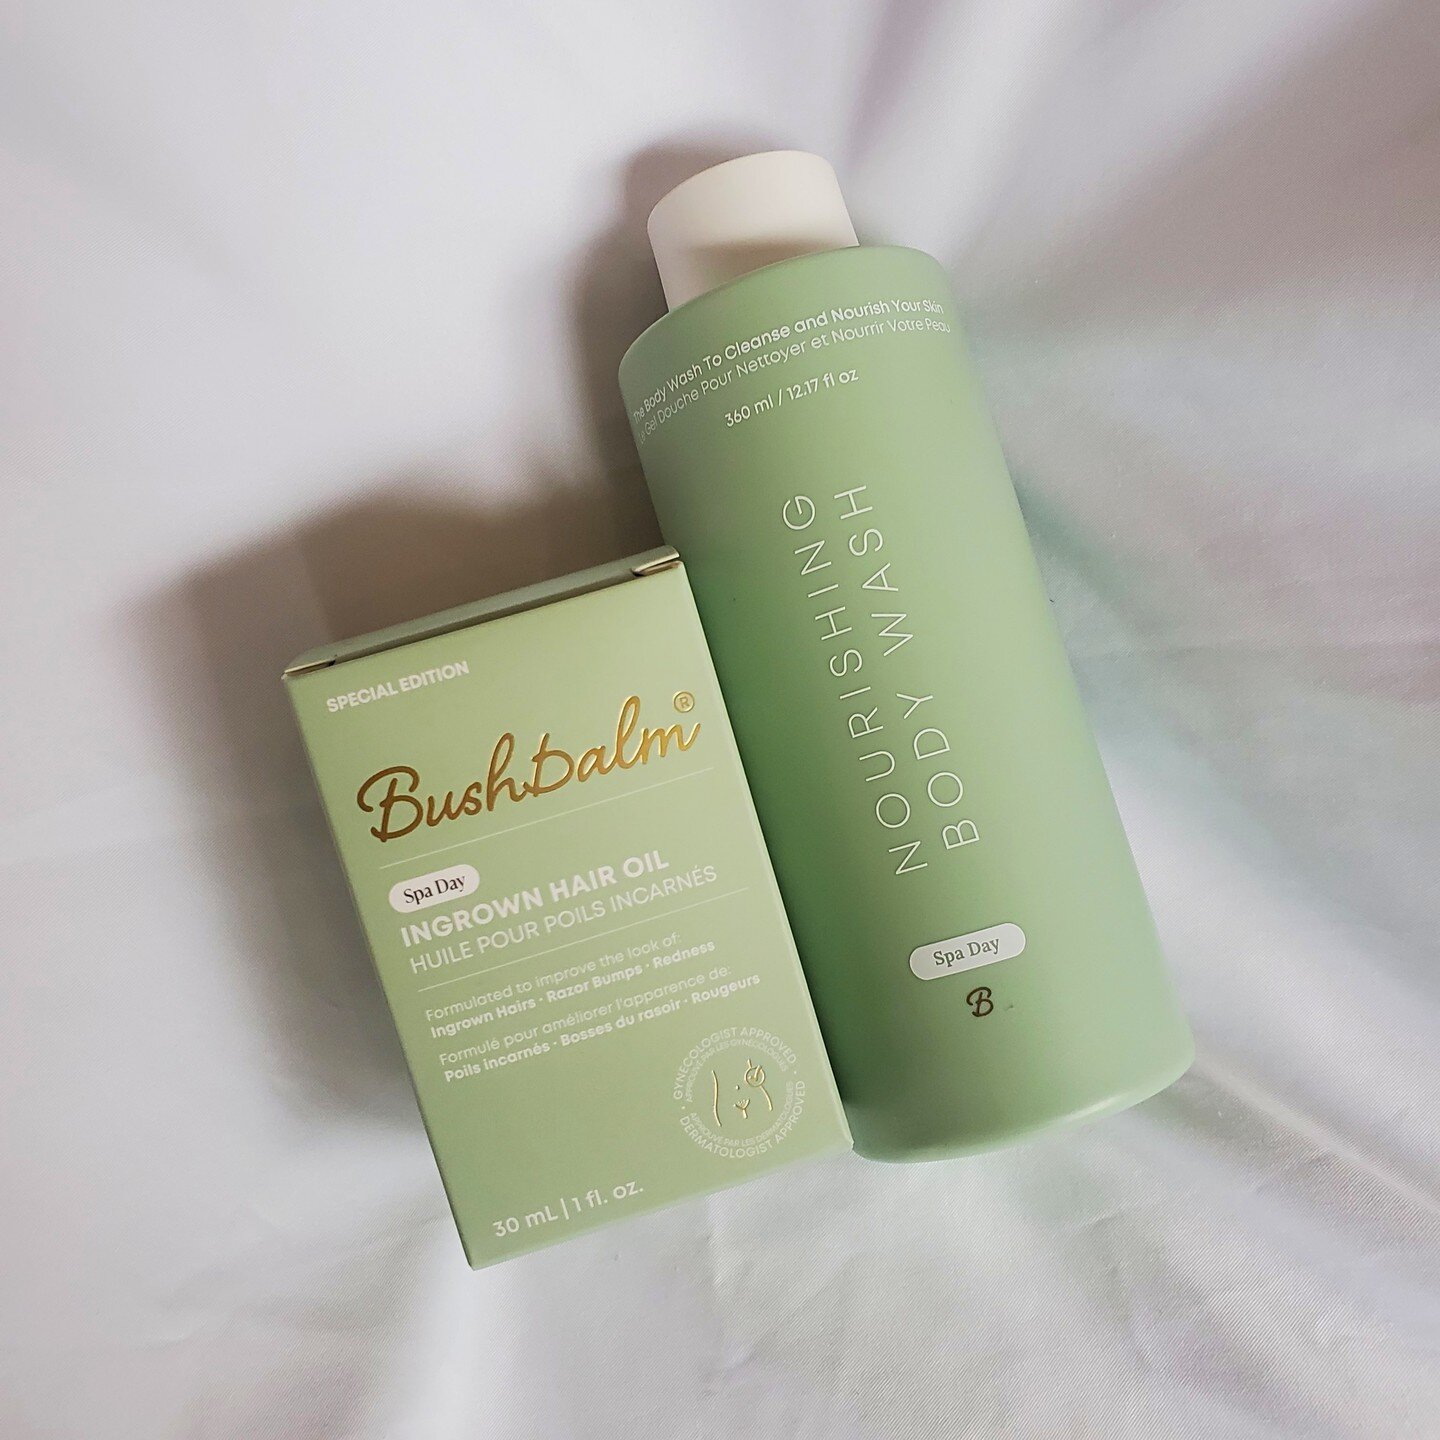 ✳️This is not a drill!✳️

The new, wholesale exclusive SPECIAL EDITION Bushbalm Ingrown Hair Oil is now available in store! 

If you love the refreshing and uplifting scent of Eucalyptus and Citrus from Bushbalm's Spay Day Body Wash - you're in luck!